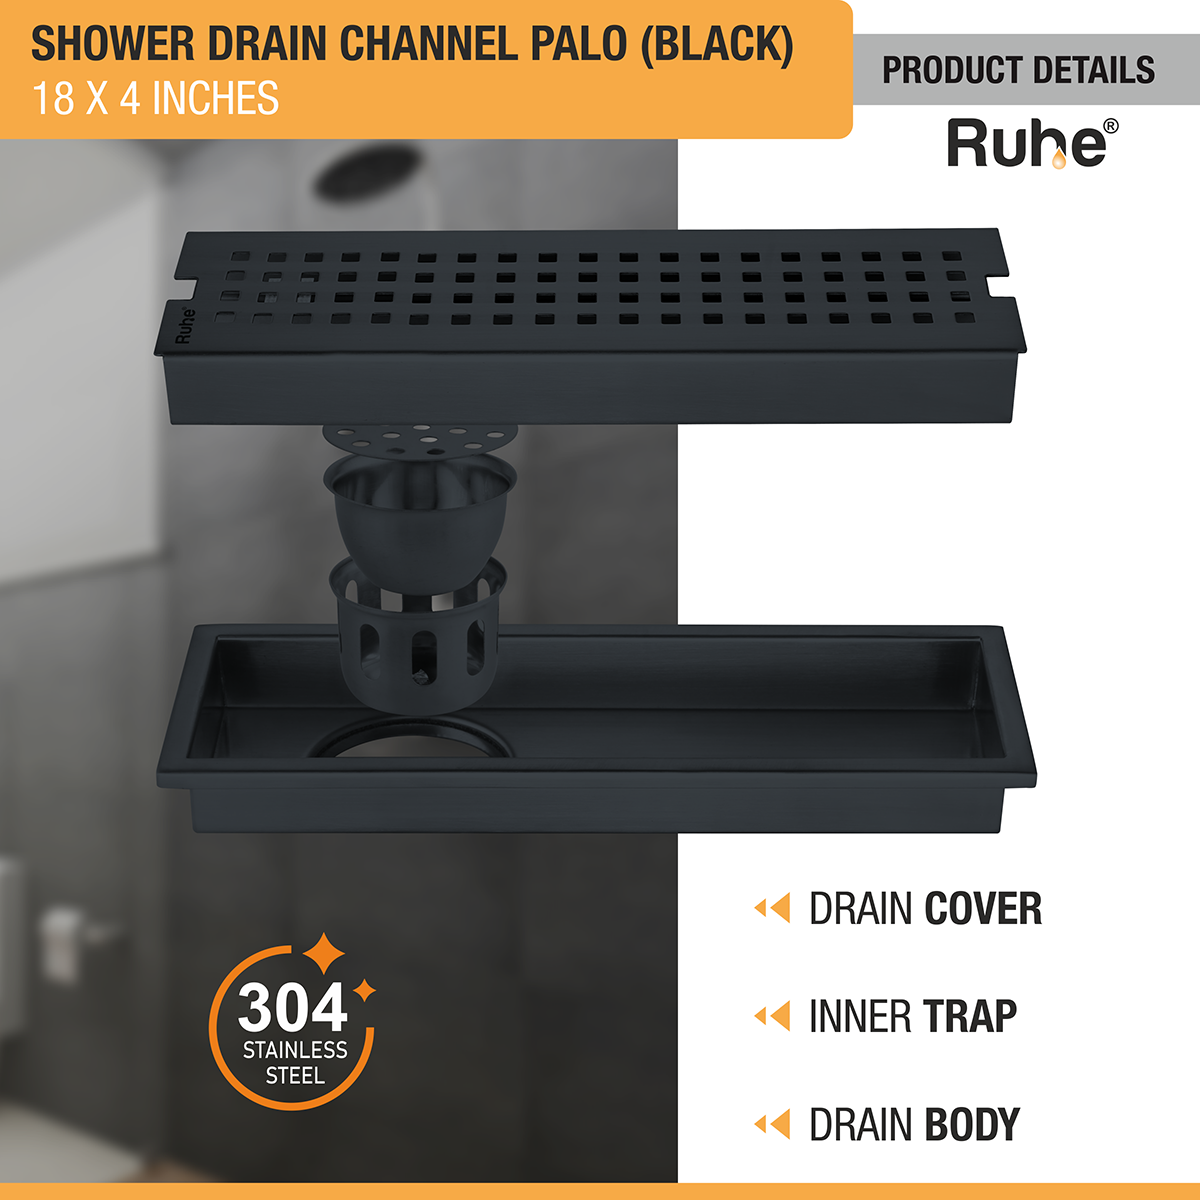 Palo Shower Drain Channel (18 x 4 Inches) Black PVD Coated with drain cover, inner insect trap, drain body